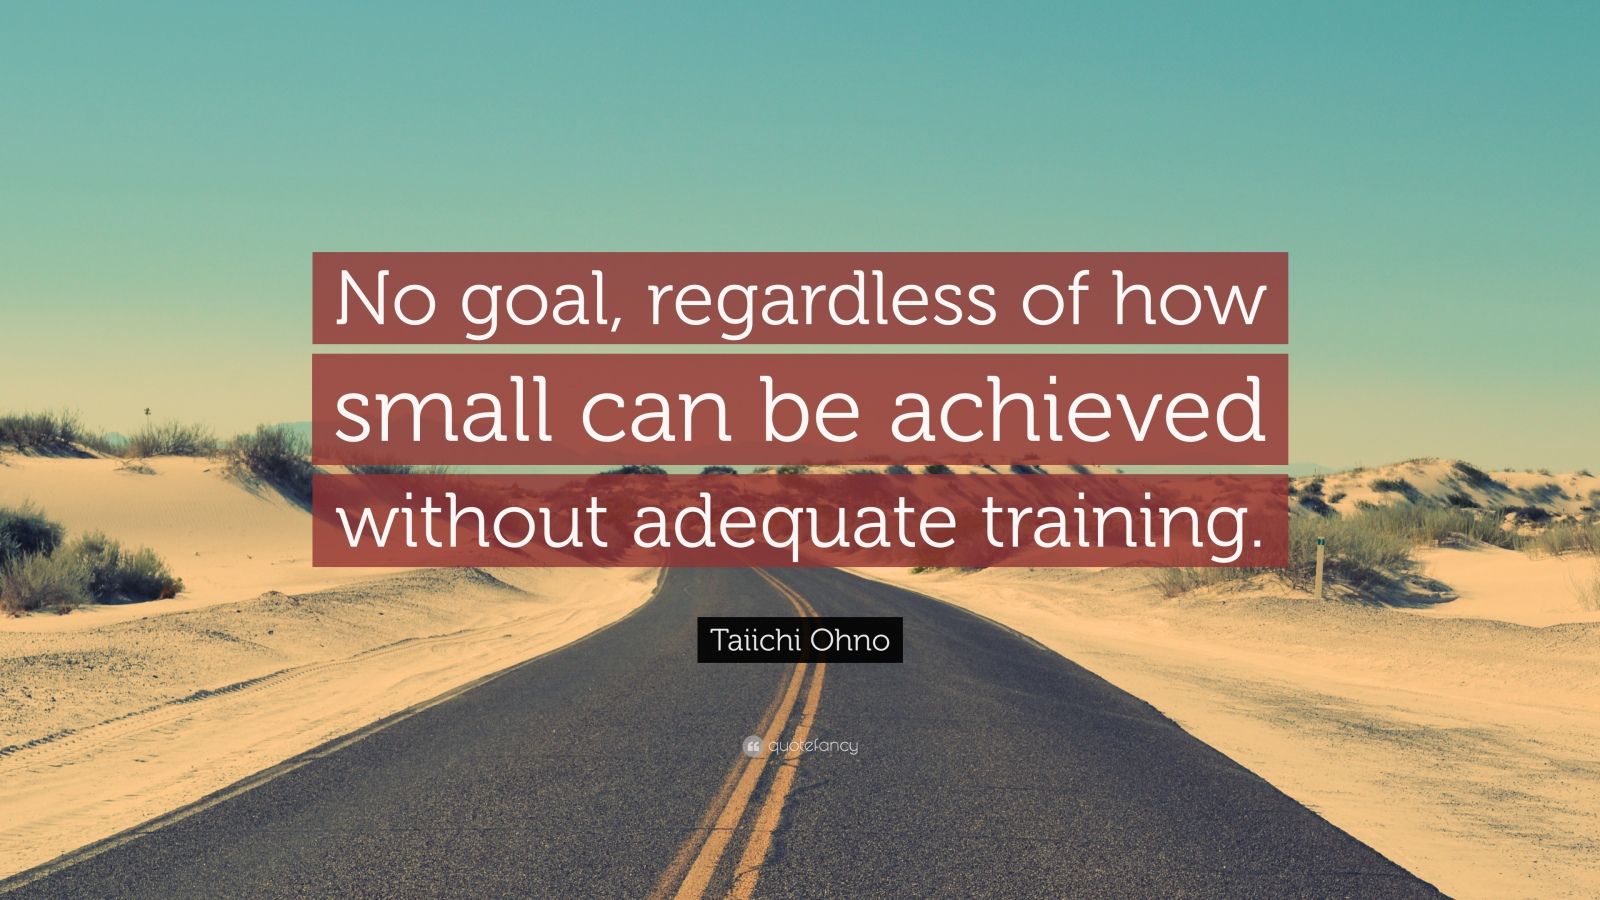 Taiichi Ohno Quote: “No goal, regardless of how small can be achieved ...